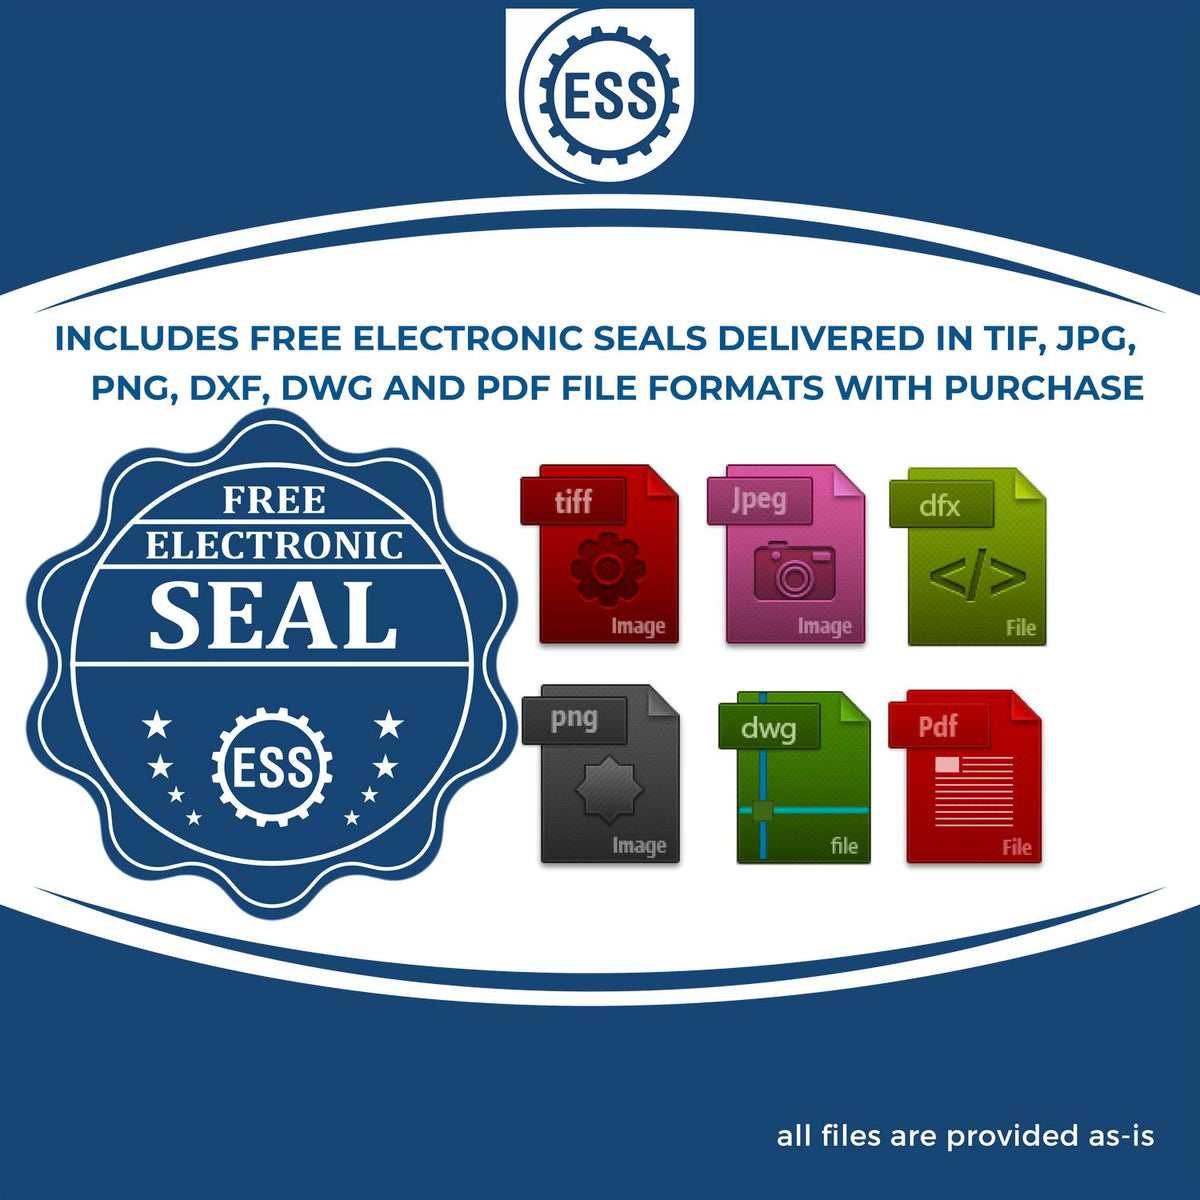 An infographic for the free electronic seal for the Self-Inking Louisiana Landscape Architect Stamp illustrating the different file type icons such as DXF, DWG, TIF, JPG and PNG.